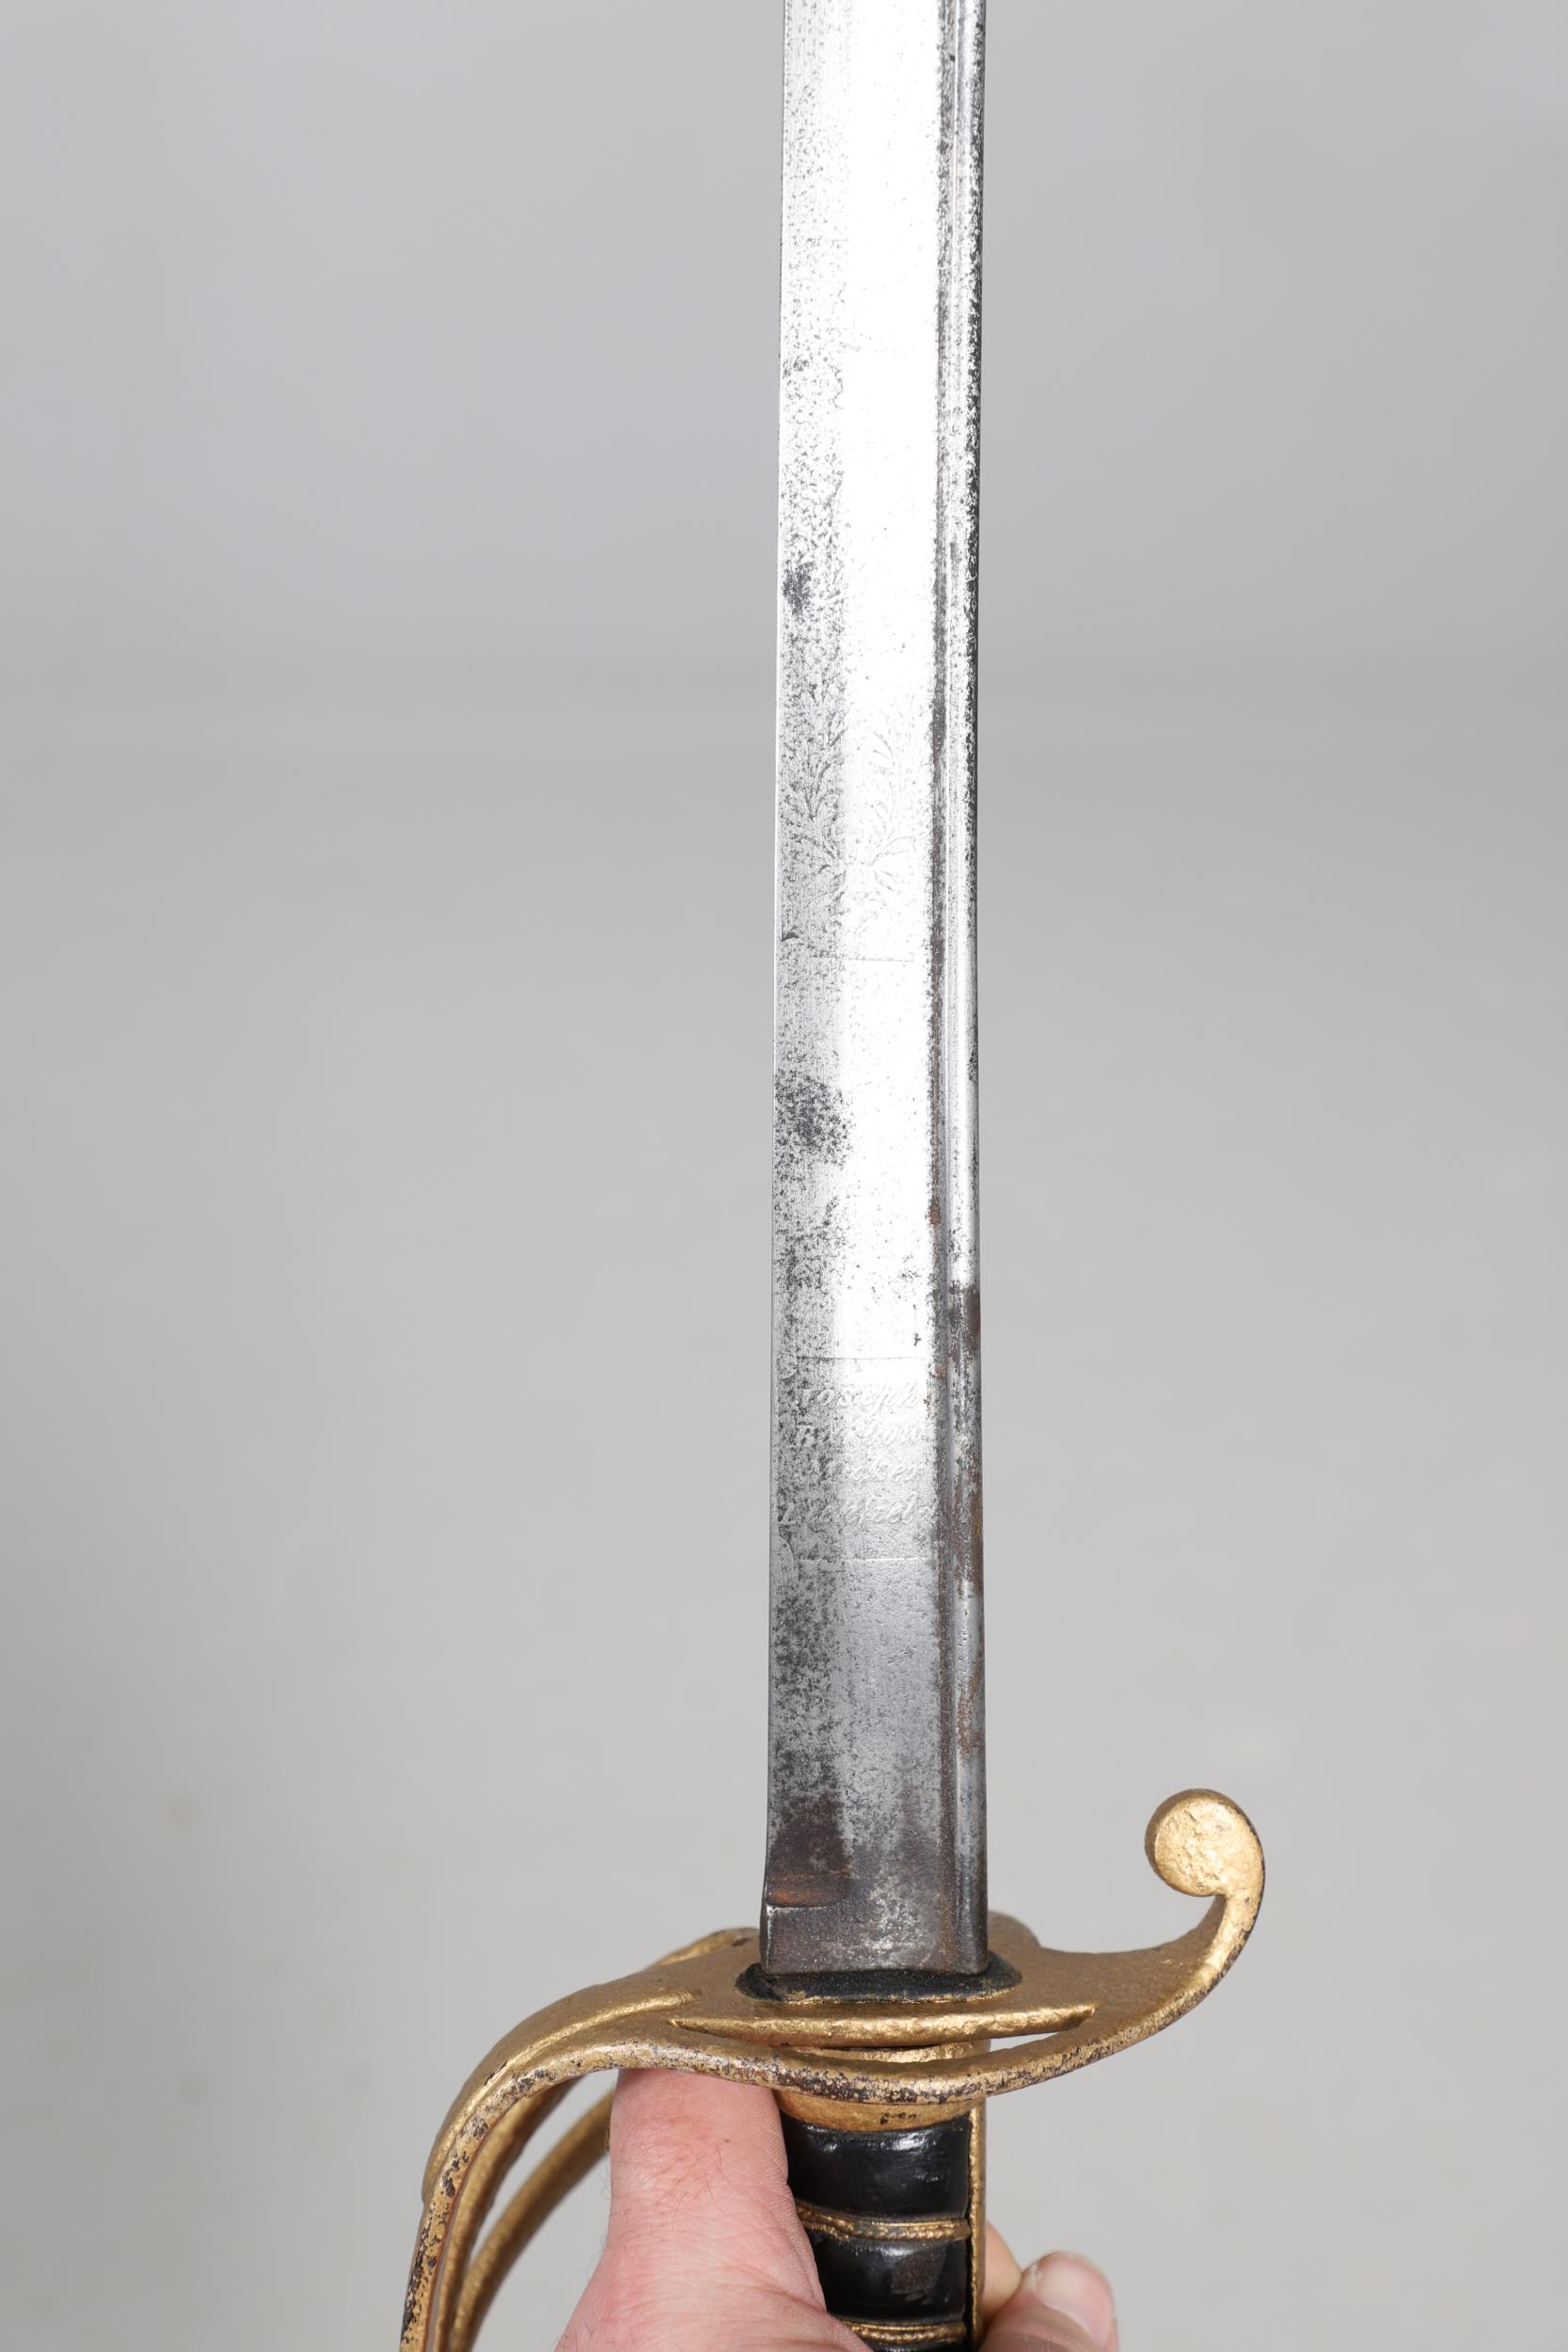 AN 1822 PATTERN LIGHT CAVALRY OFFICER'S SWORD BY BARLOW OF LONDON. - Image 8 of 14